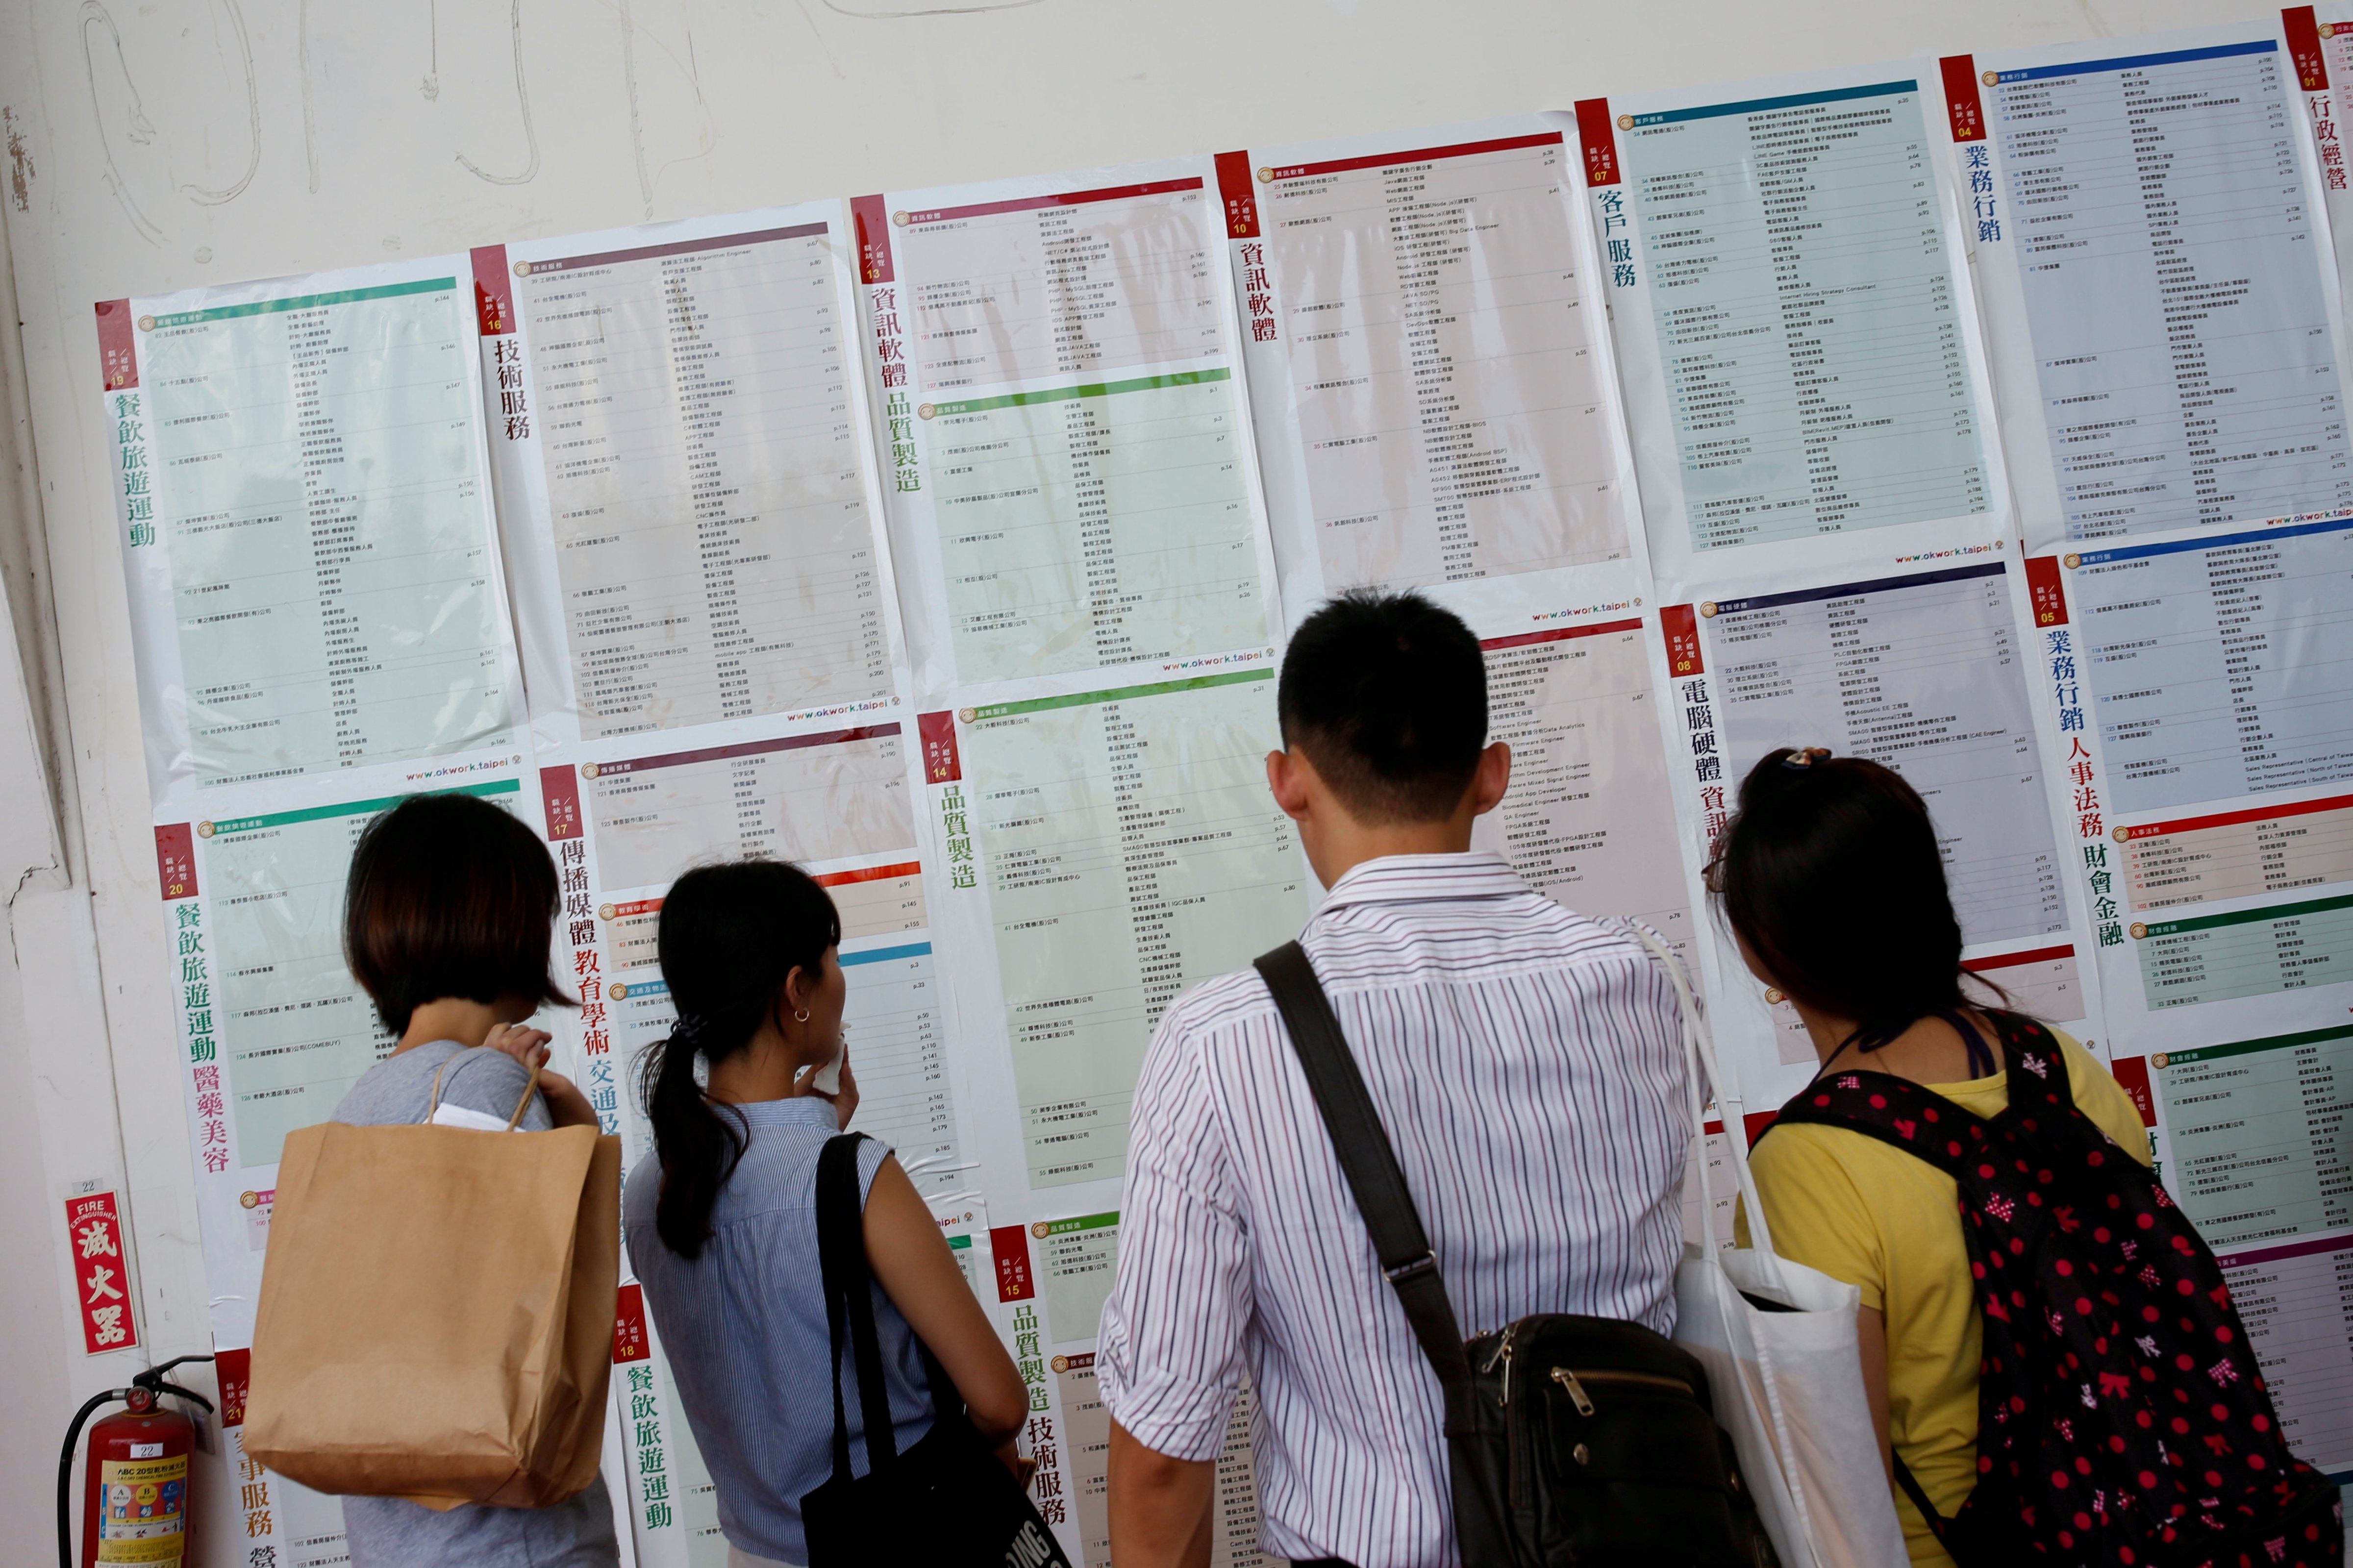 Job seekers look at job information at an employment fair in Taipei, Taiwan on May 28, 2016. (Tyrone Siu—REUTERS)